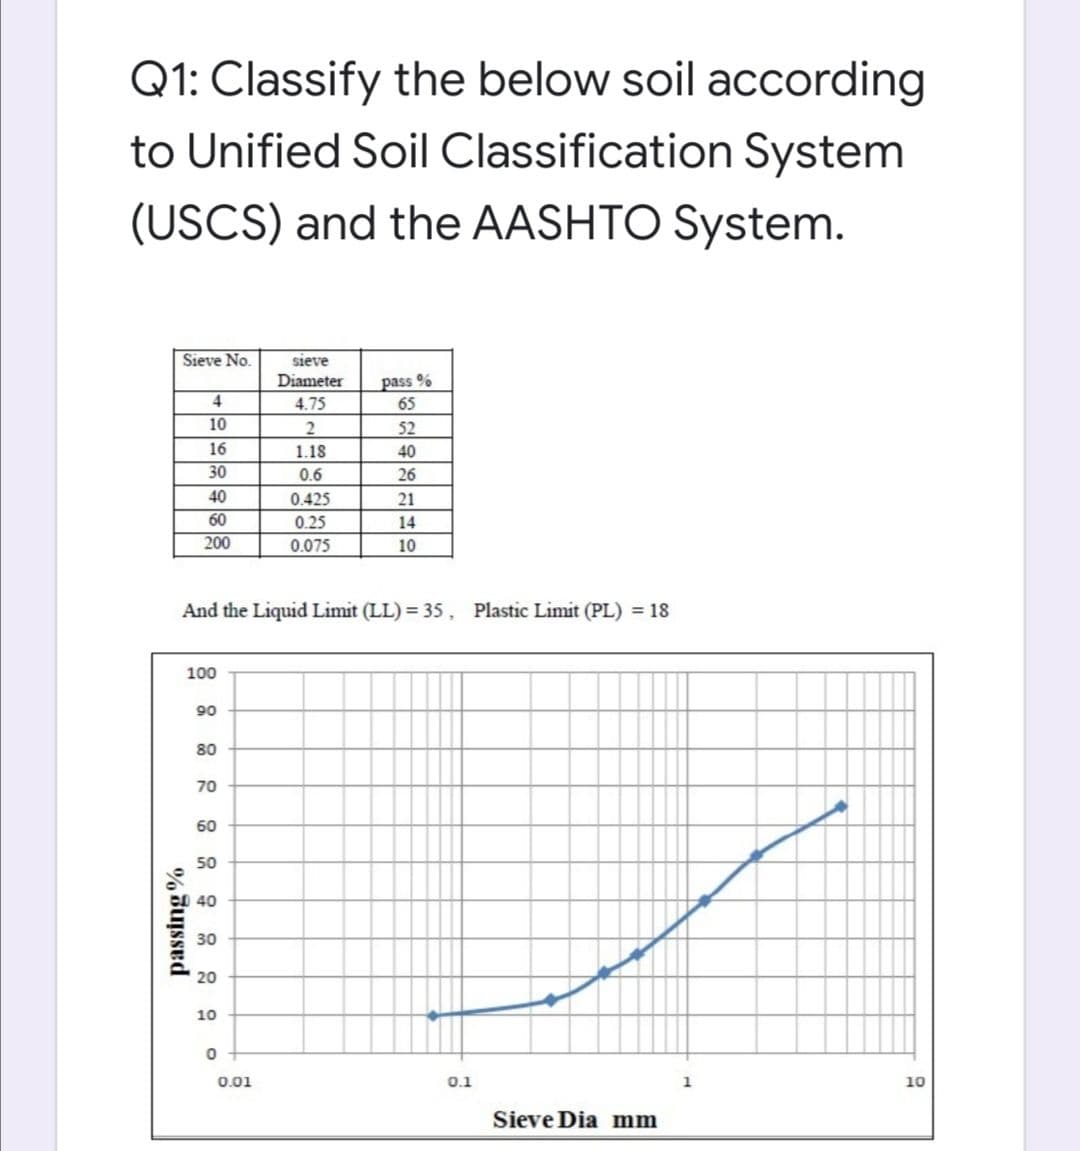 Q1: Classify the below soil according
to Unified Soil Classification System
(USCS) and the AASHTO System.
Sieve No.
sieve
pass %
65
Diameter
4
4.75
10
52
16
1.18
40
30
0.6
26
40
0.425
21
60
0.25
14
200
0.075
10
And the Liquid Limit (LL) = 35 , Plastic Limit (PL) = 18
100
90
80
70
60
50
40
30
20
10
0.01
0.1
10
Sieve Dia mm
% Buyssed
